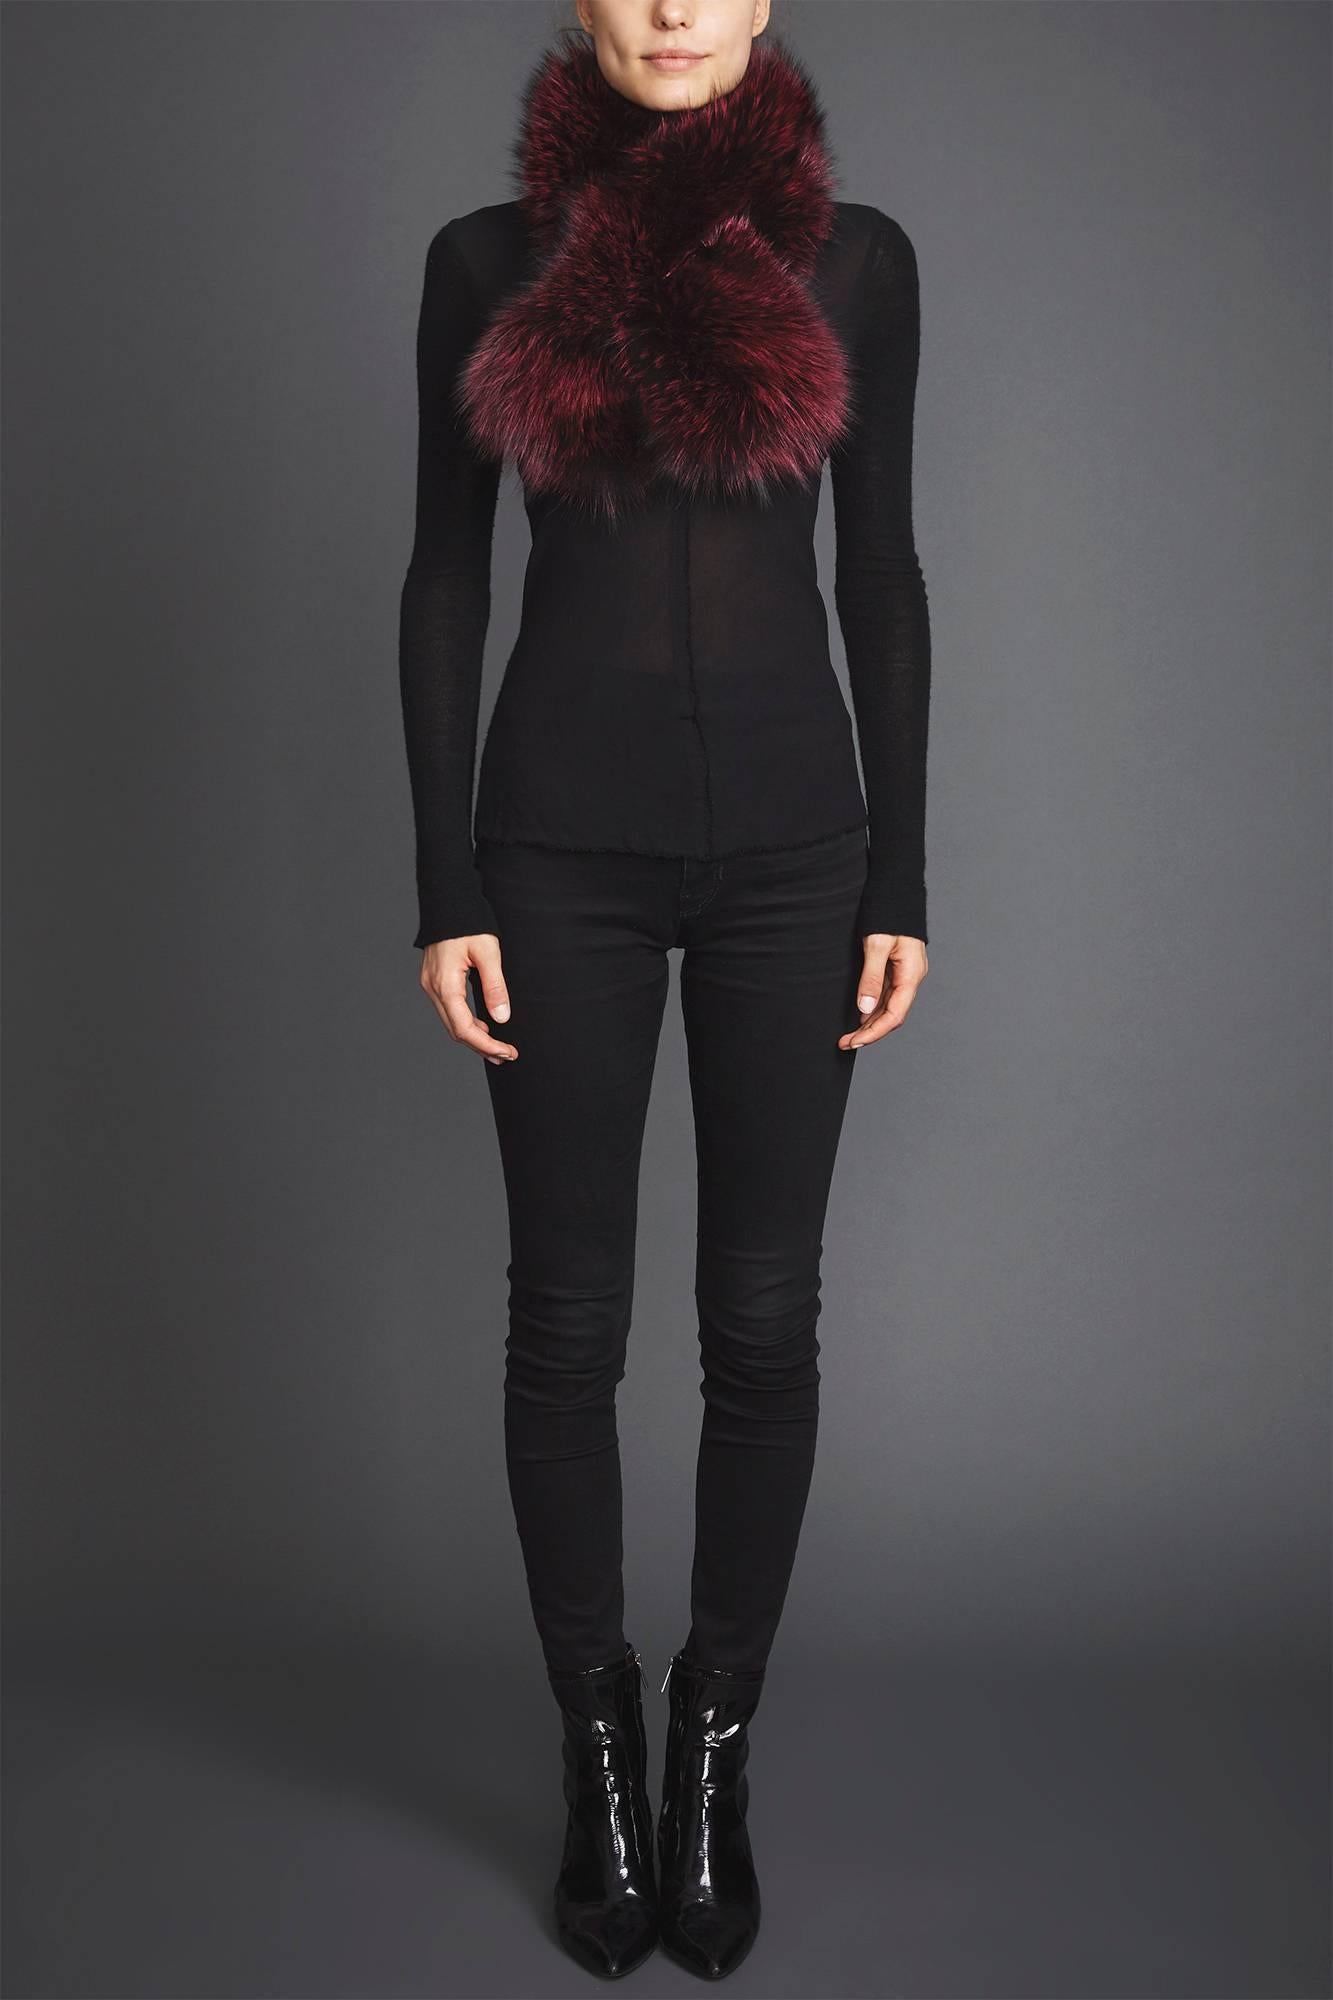 Verheyen London Lapel Cross-through Collar in Soft Ruby Fox Fur - Brand New (RRP Price)

The Lapel Cross-through Collar is Verheyen London’s casual everyday design, which is perfectly shaped to wear over any outfit. Designed for layering, this